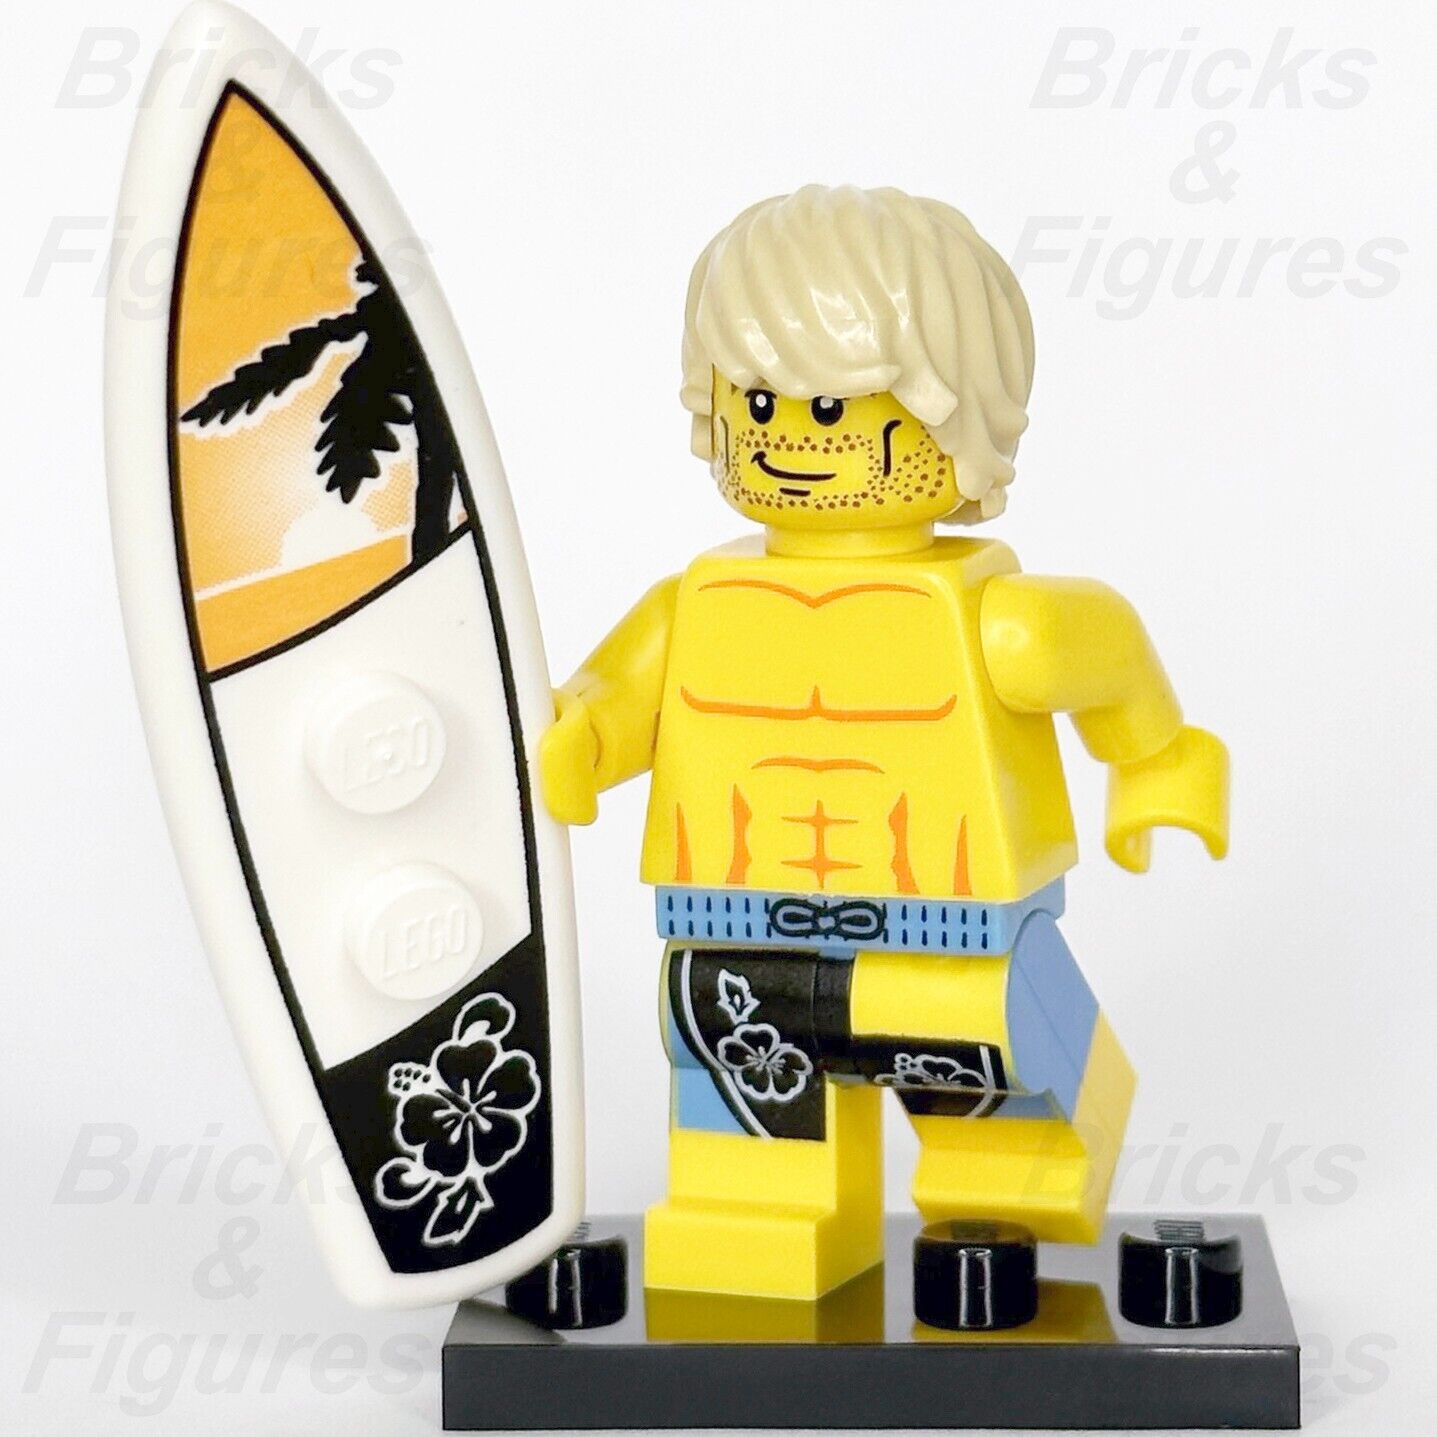 LEGO Surfer Collectible Minifigures Series 2 with Surfboard 8684 col02-15 New - Bricks & Figures